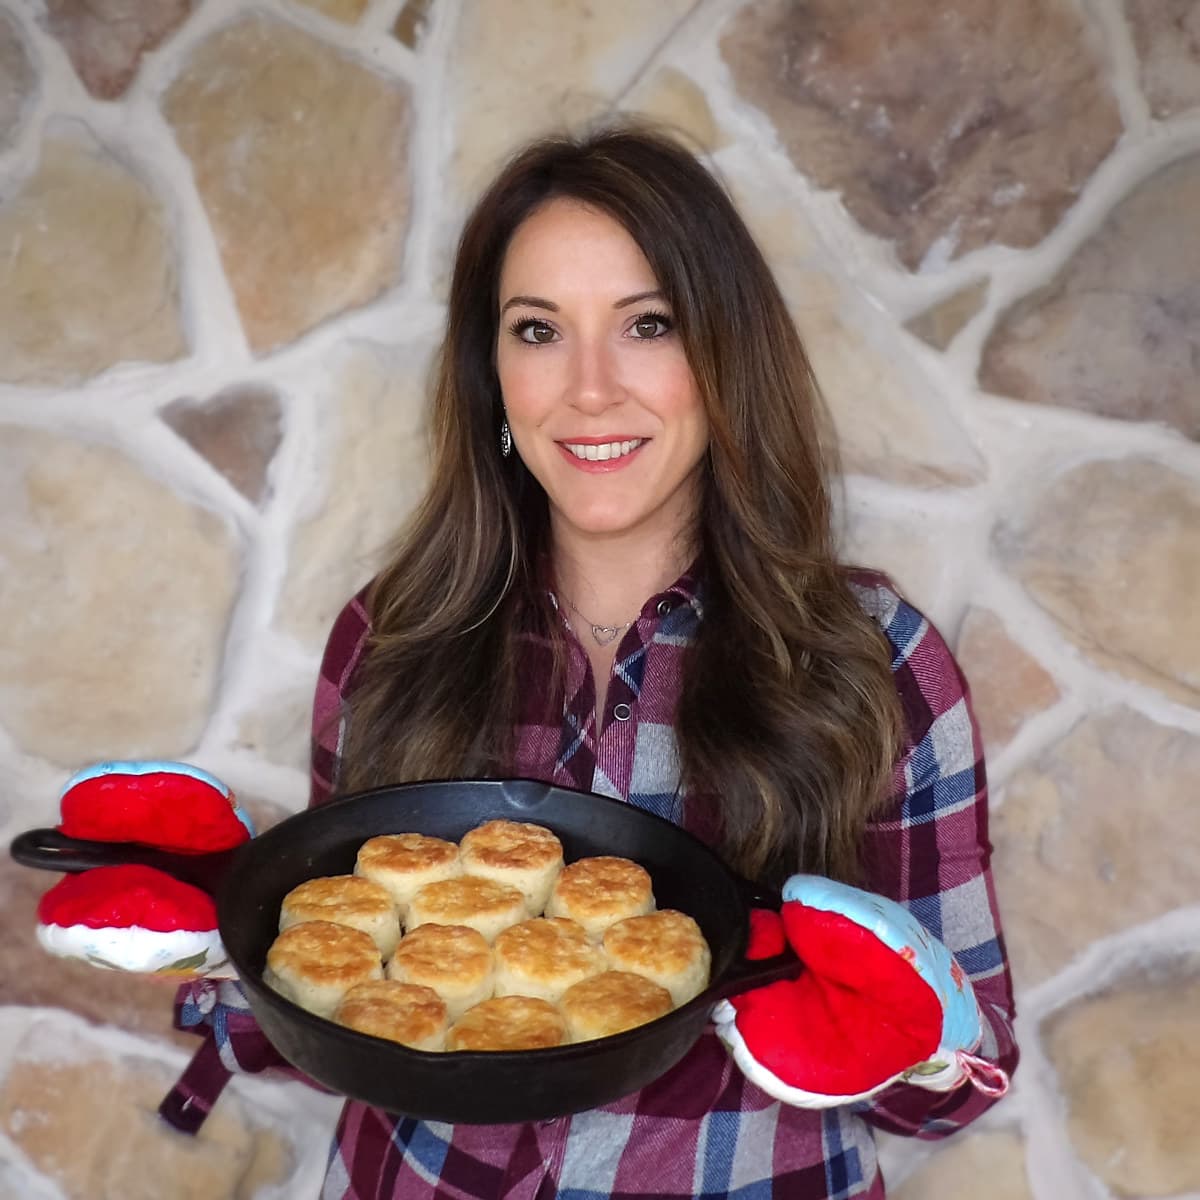 Christi, the owner of Ranch Style Kitchen, holding a cast-iron skillet full of homemade biscuits.